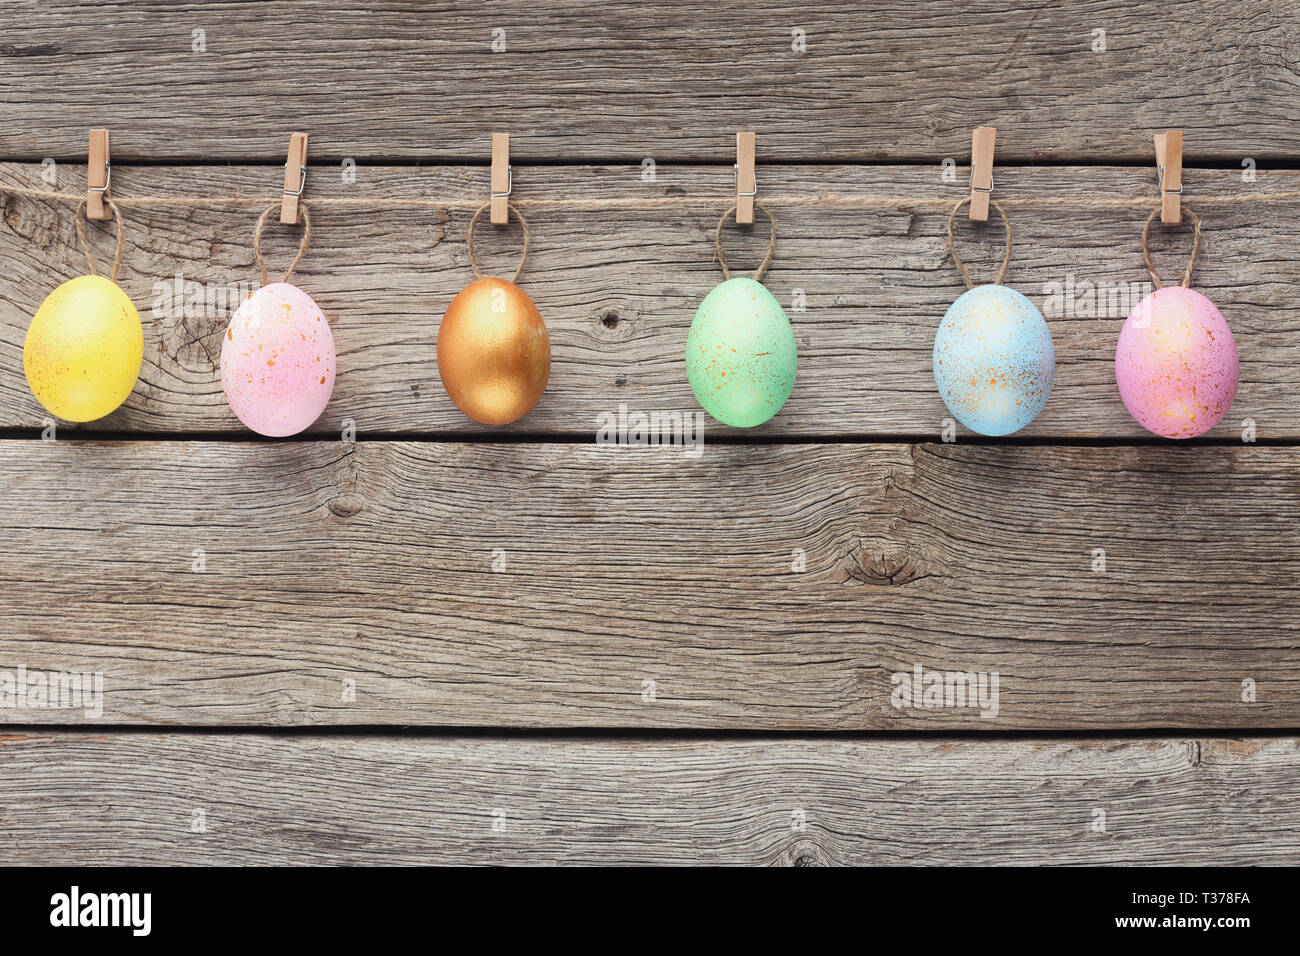 Colourful quail eggs attach to rope with clothes pins on wooden background, copy space Stock Photo